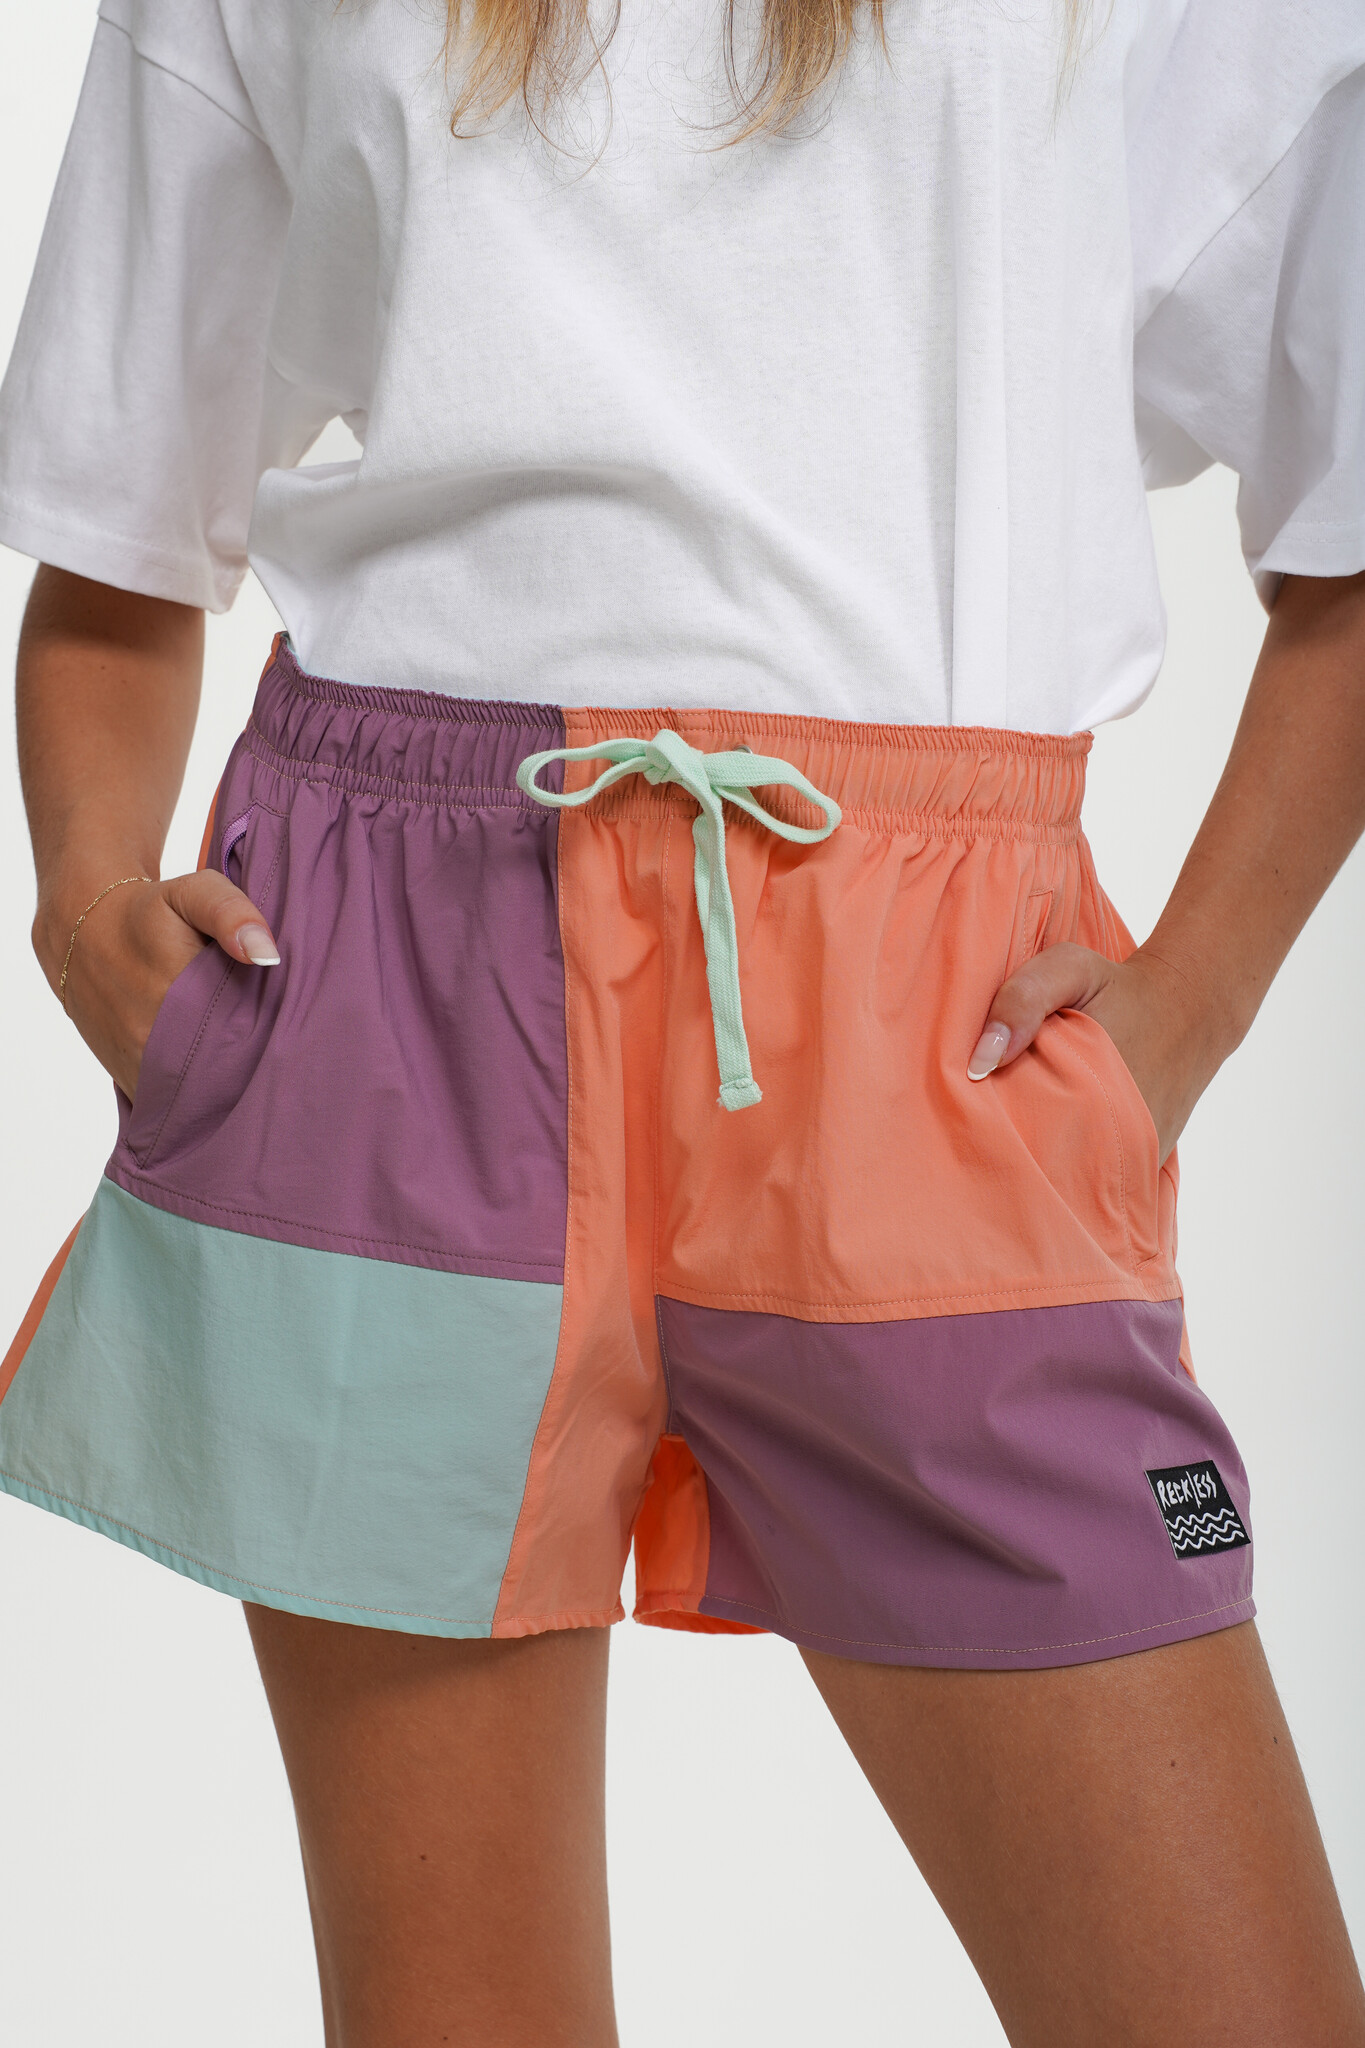 Notice the reckless FEMME OFFSHORE SPORT PEACH PURPLE